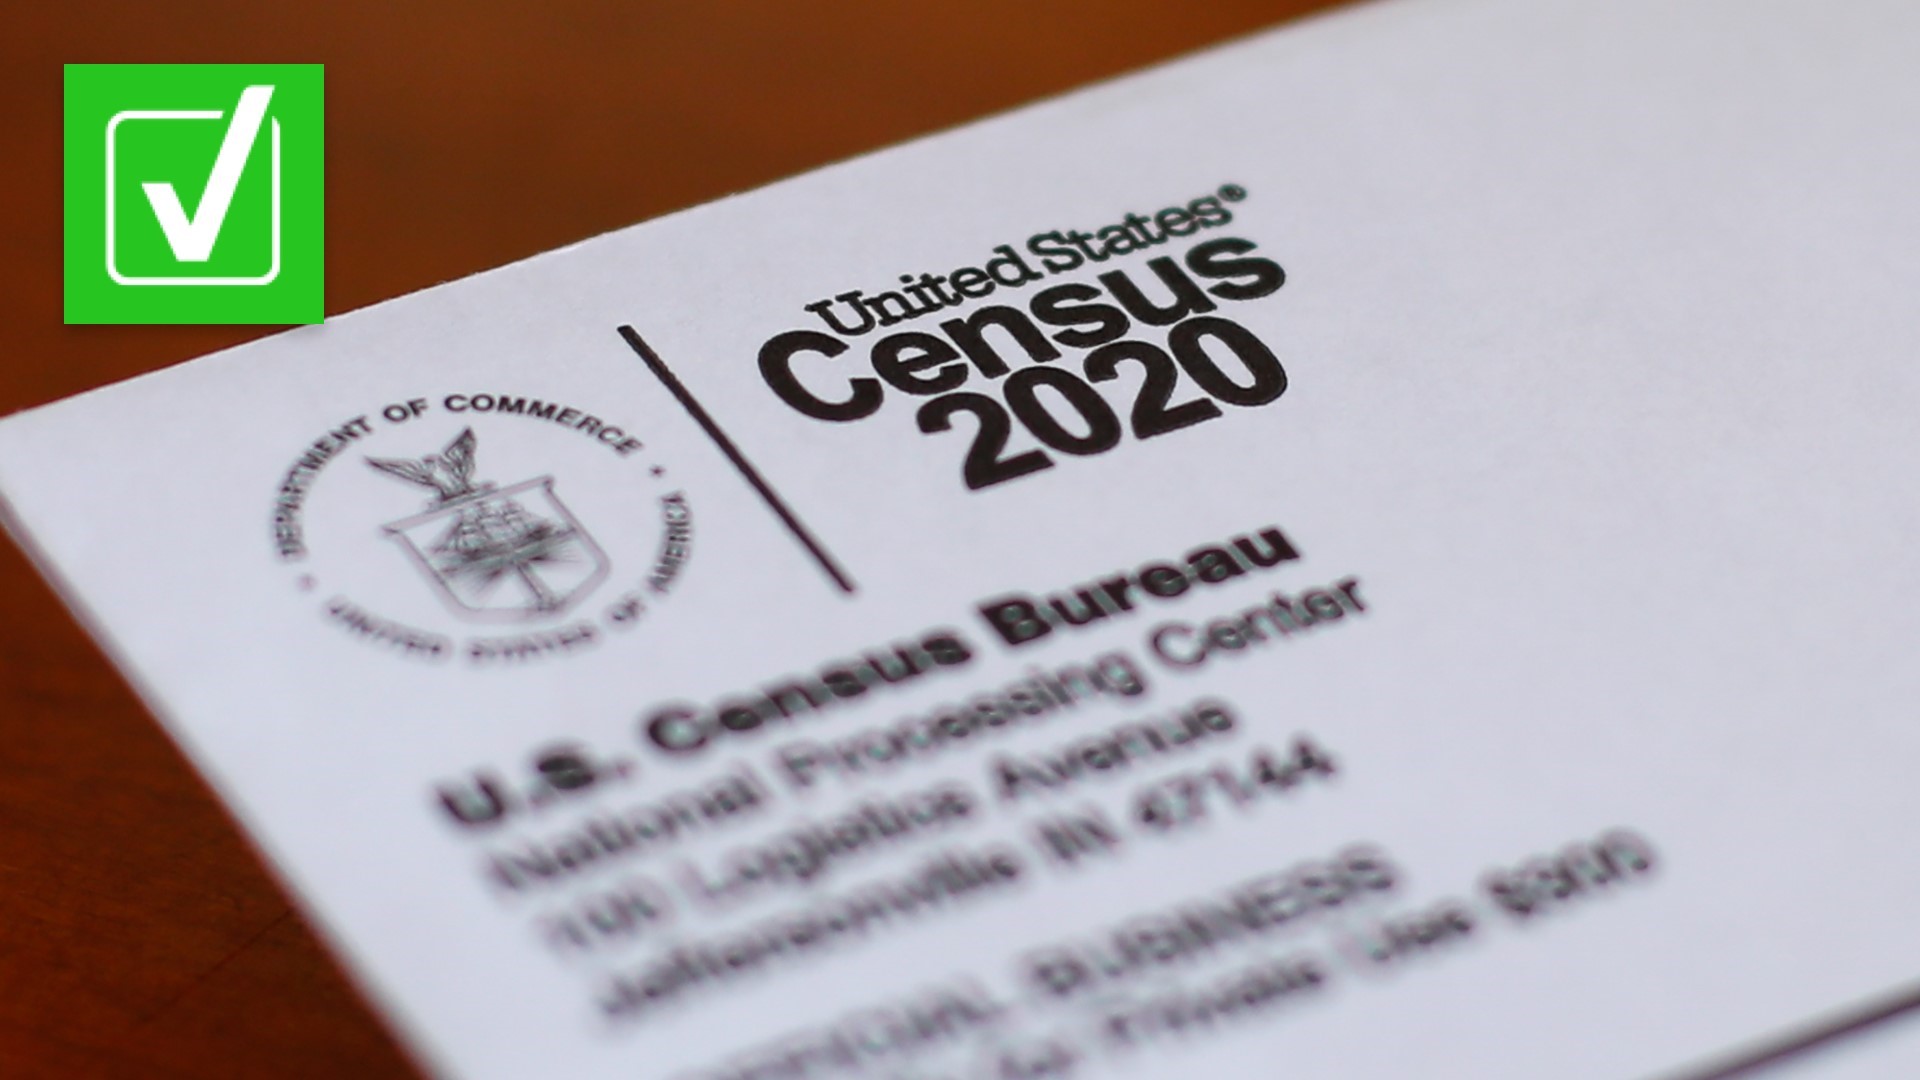 The first results of the 2020 census were released in April 2021, however, the full redistricting data will not be delivered until September 2021.